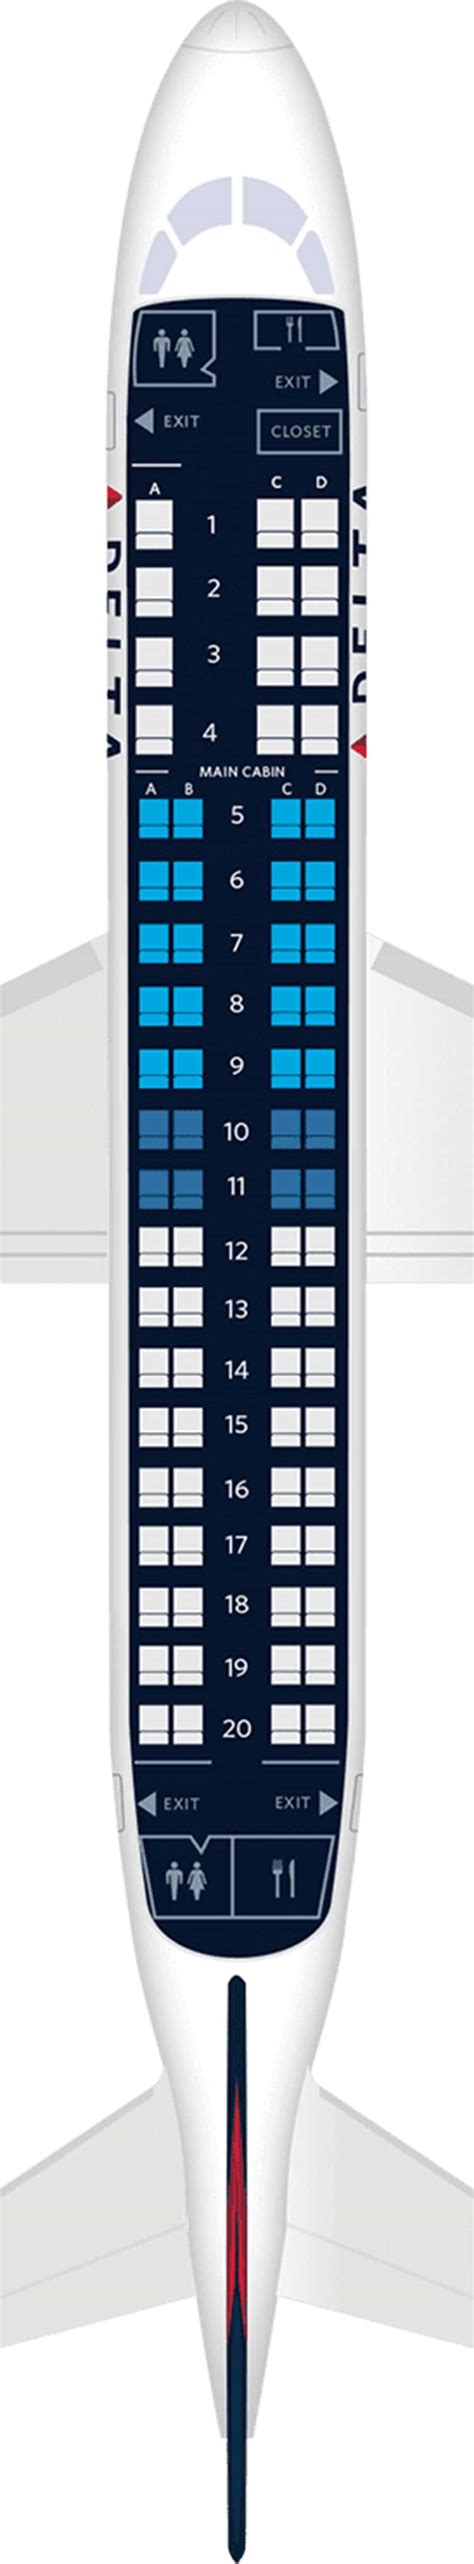 Our picks: rows 1 and 6. Caution: several rows have slightly misaligned windows due to window spacing. Operated by SkyWest, the Embraer 175 is Alaska's best regional jet experience, offering a first class cabin with in-seat power. It also features their widest economy seat at 18.25 inches, which helps make this regional jet feel a bit less .... 